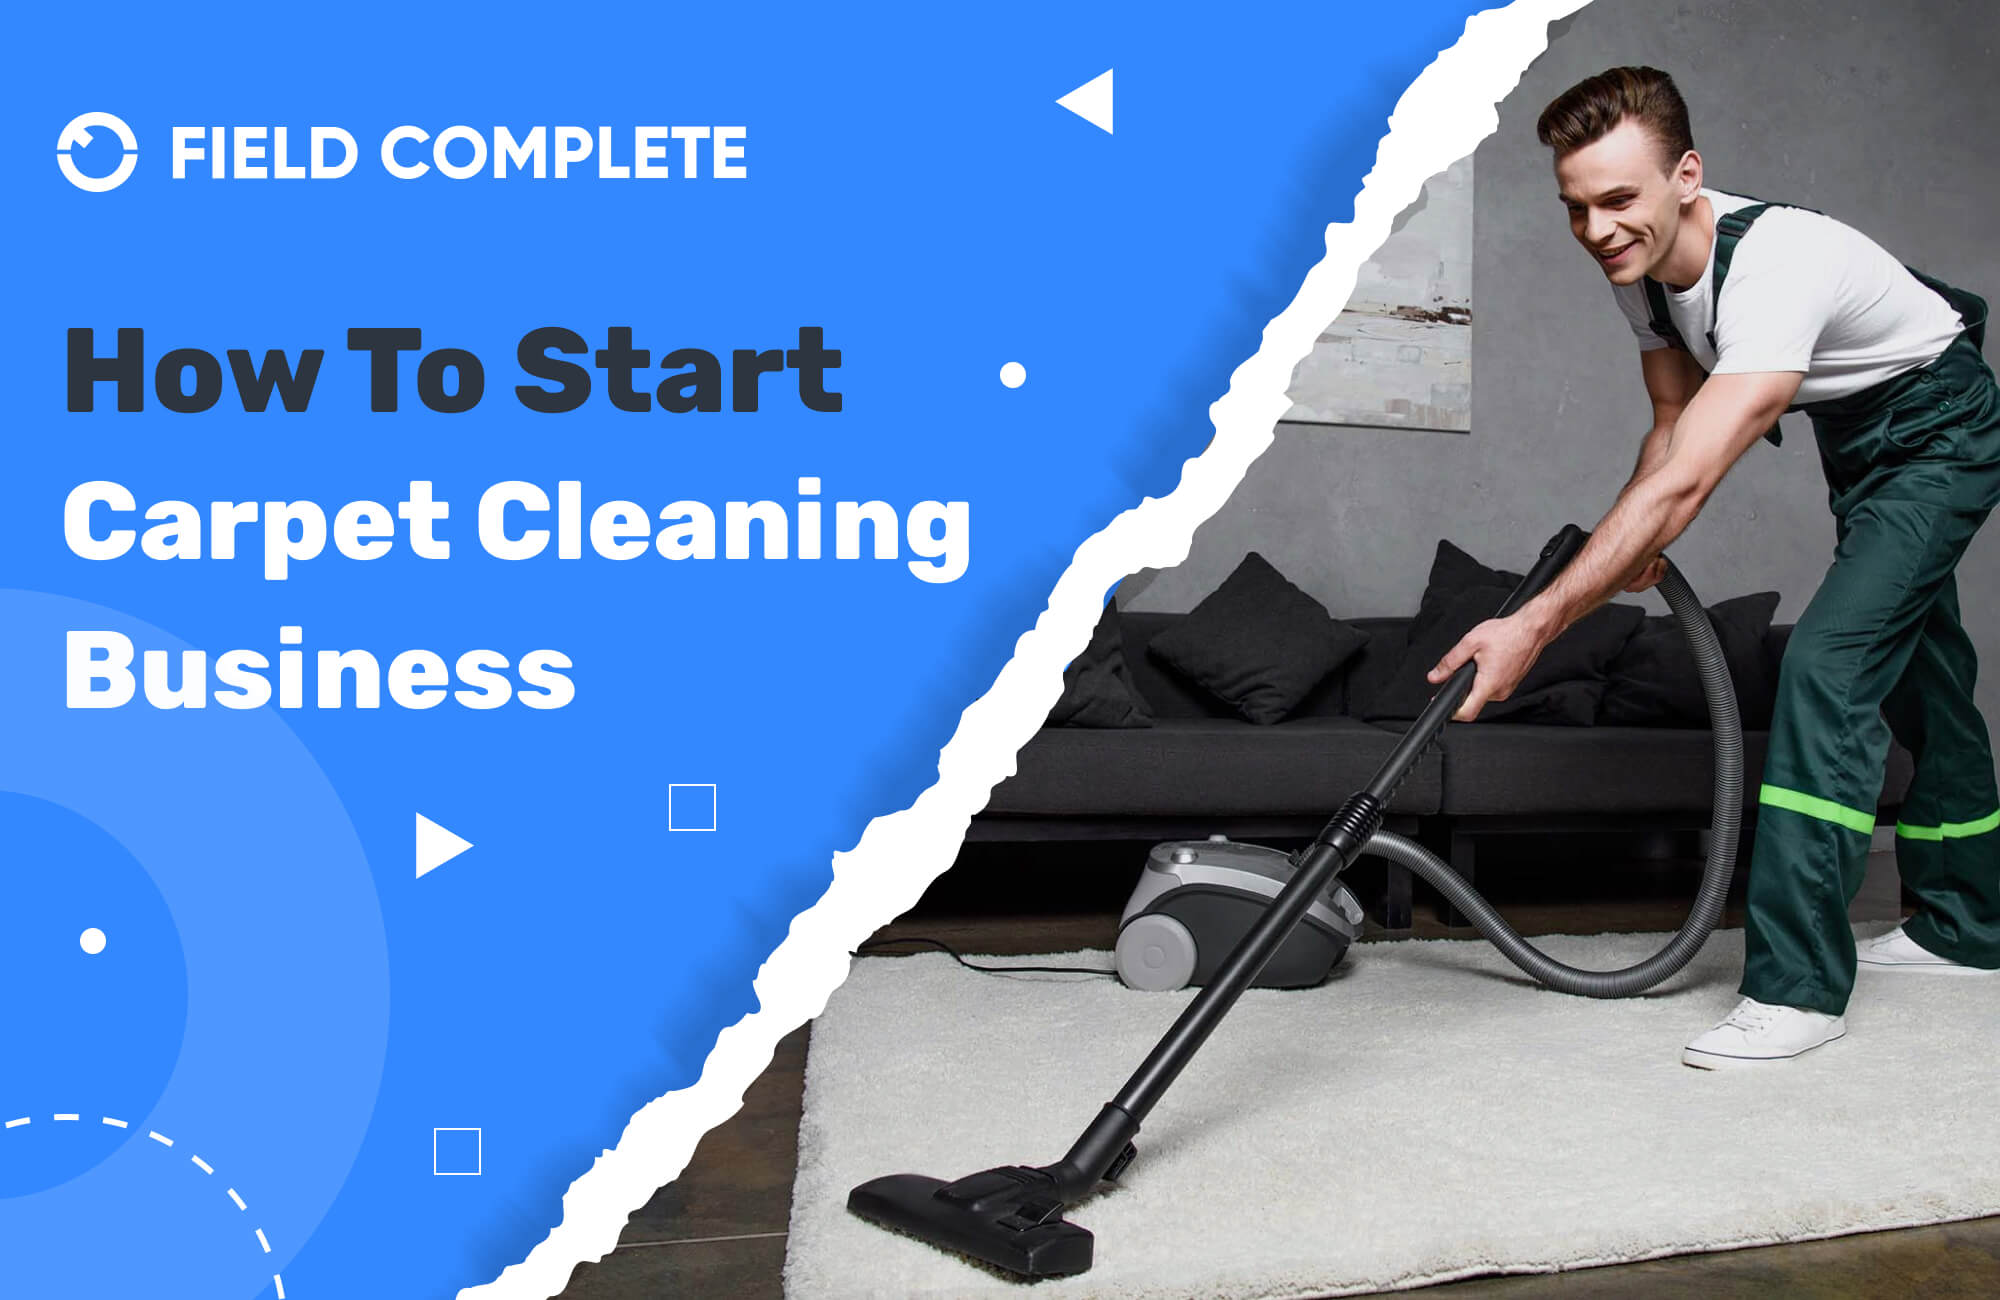 How To Start Carpet Cleaning Business?